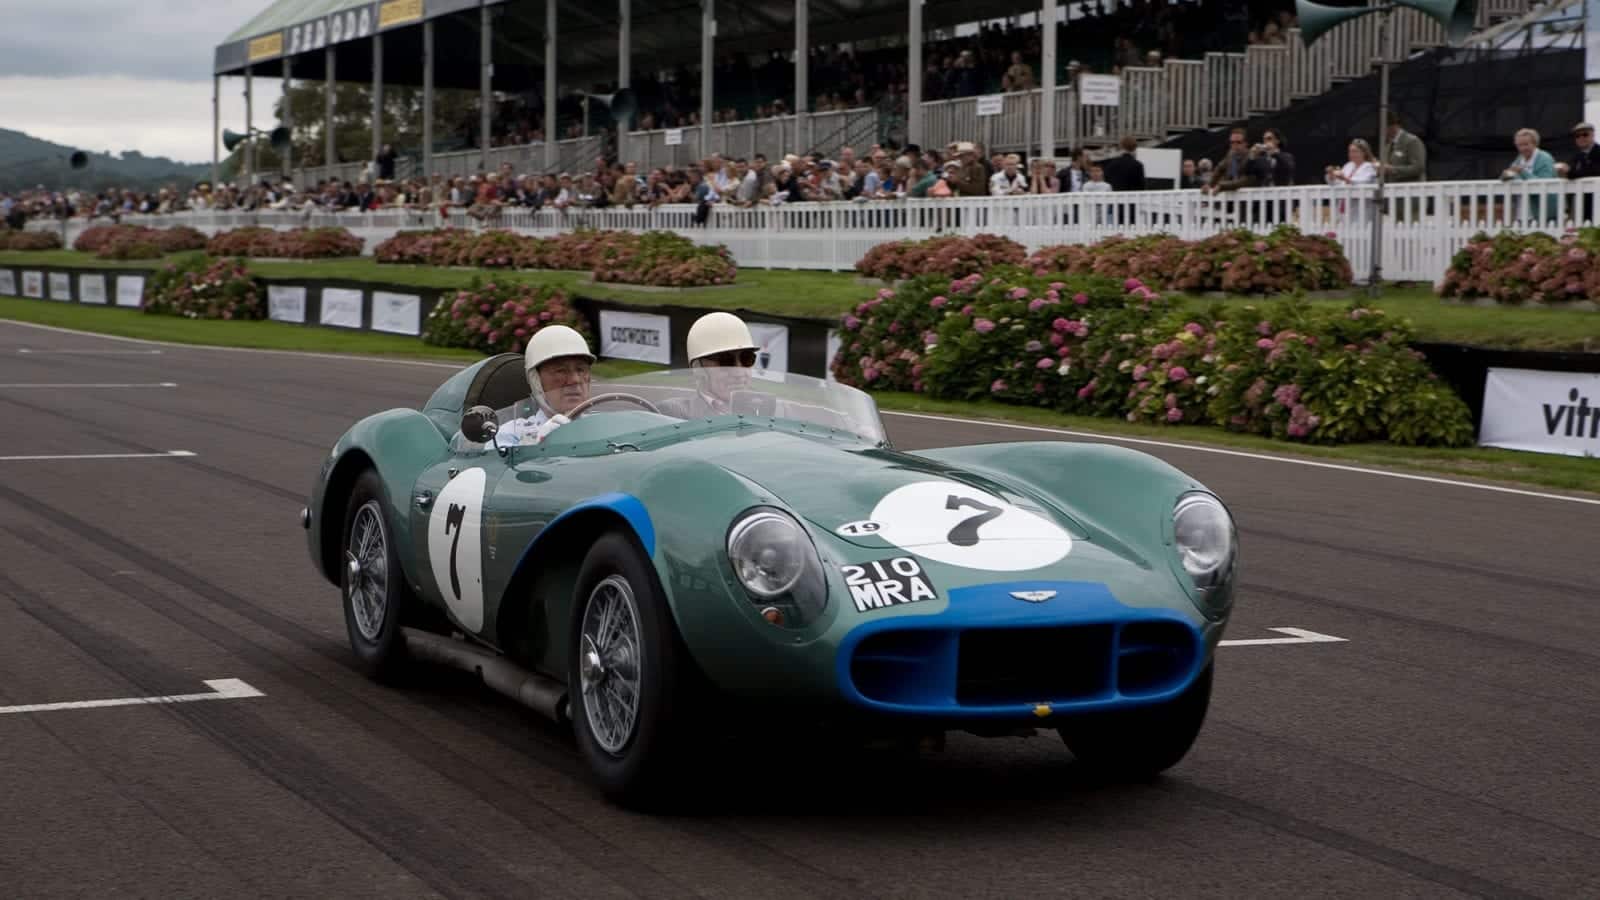 Stirling Moss and Roy Salvadori in a 1955 Aston Martin DB3S at the 2007 Goodwood Revival